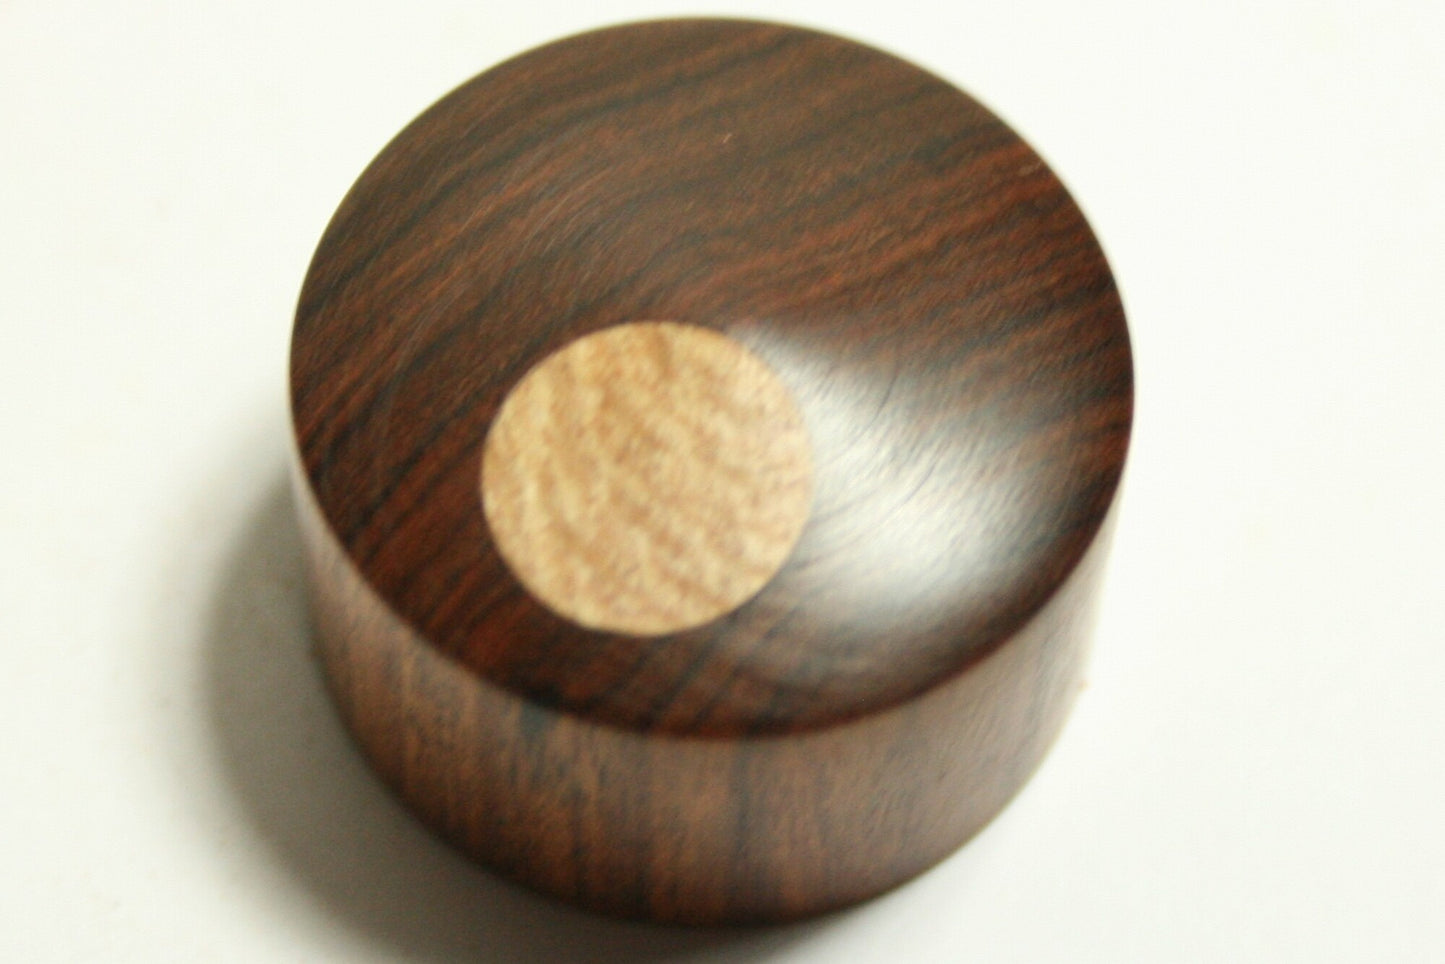 Guitar Knob: Rosewood with Large Sycamore Cap (15/16 dia x 11/16 height)